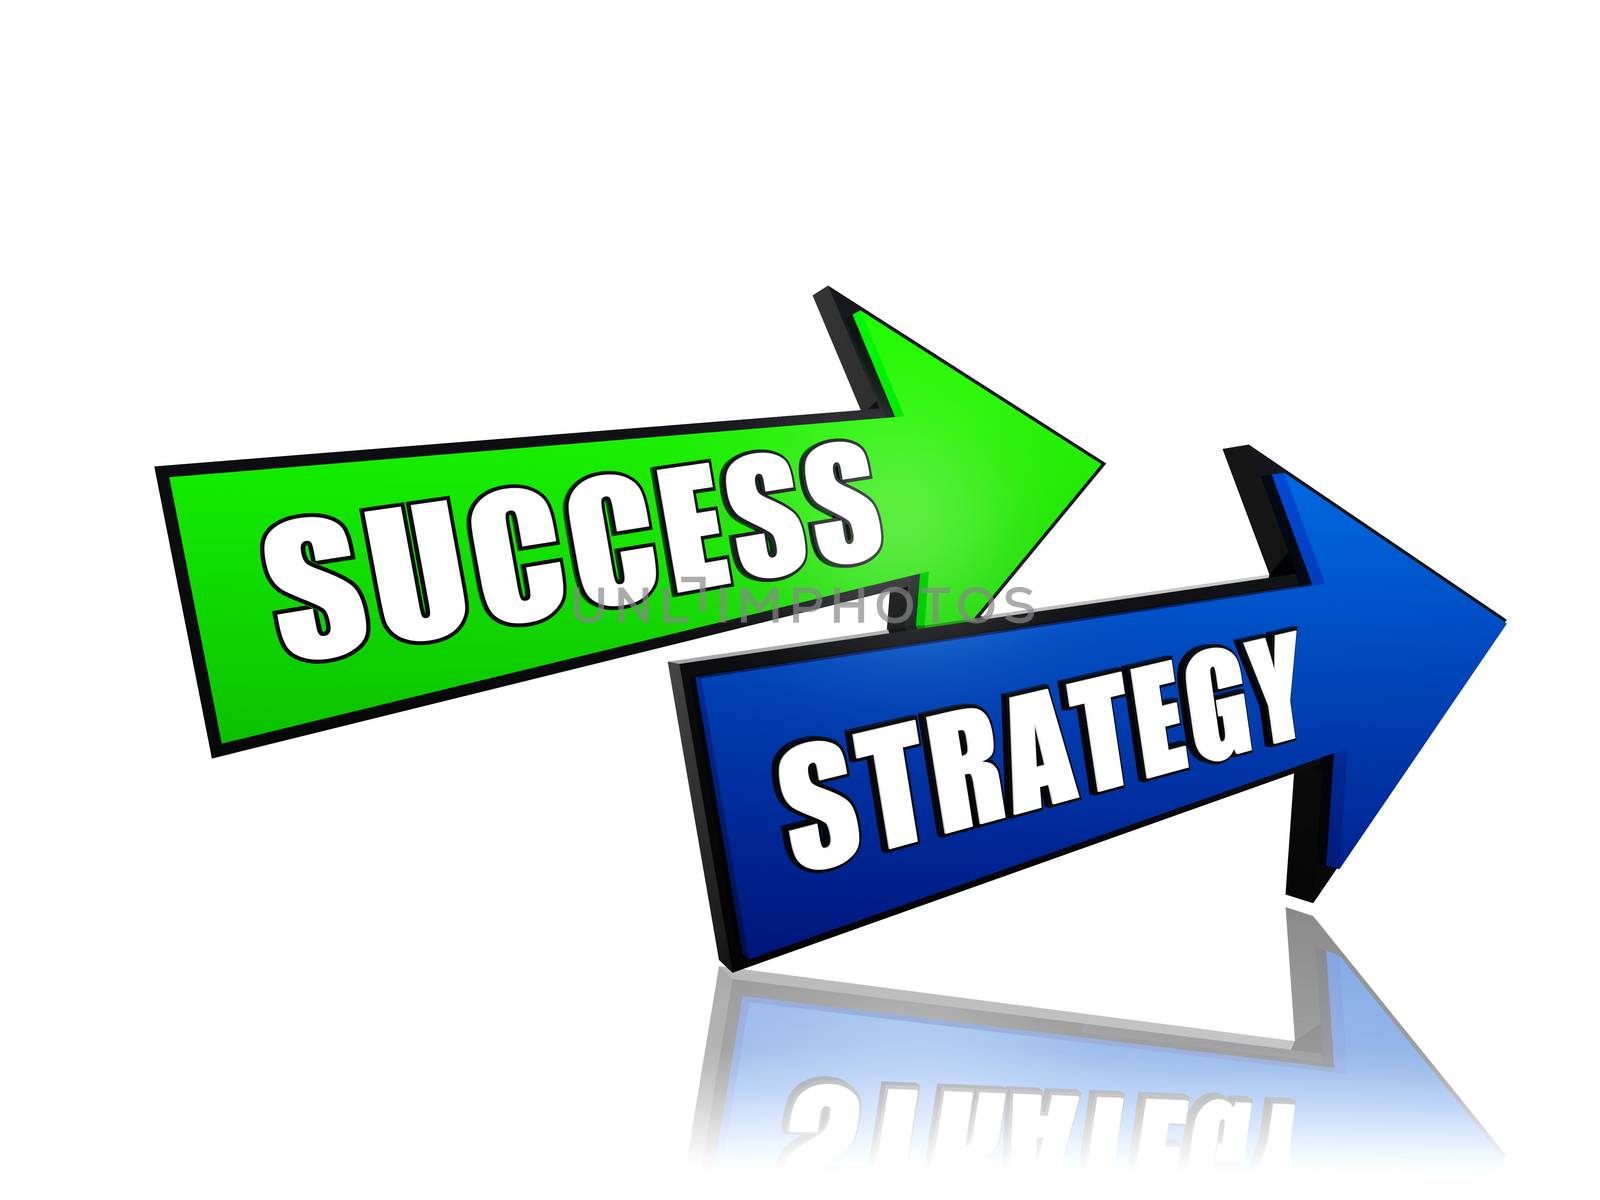 success and strategy - text in 3d arrows, business development concept words